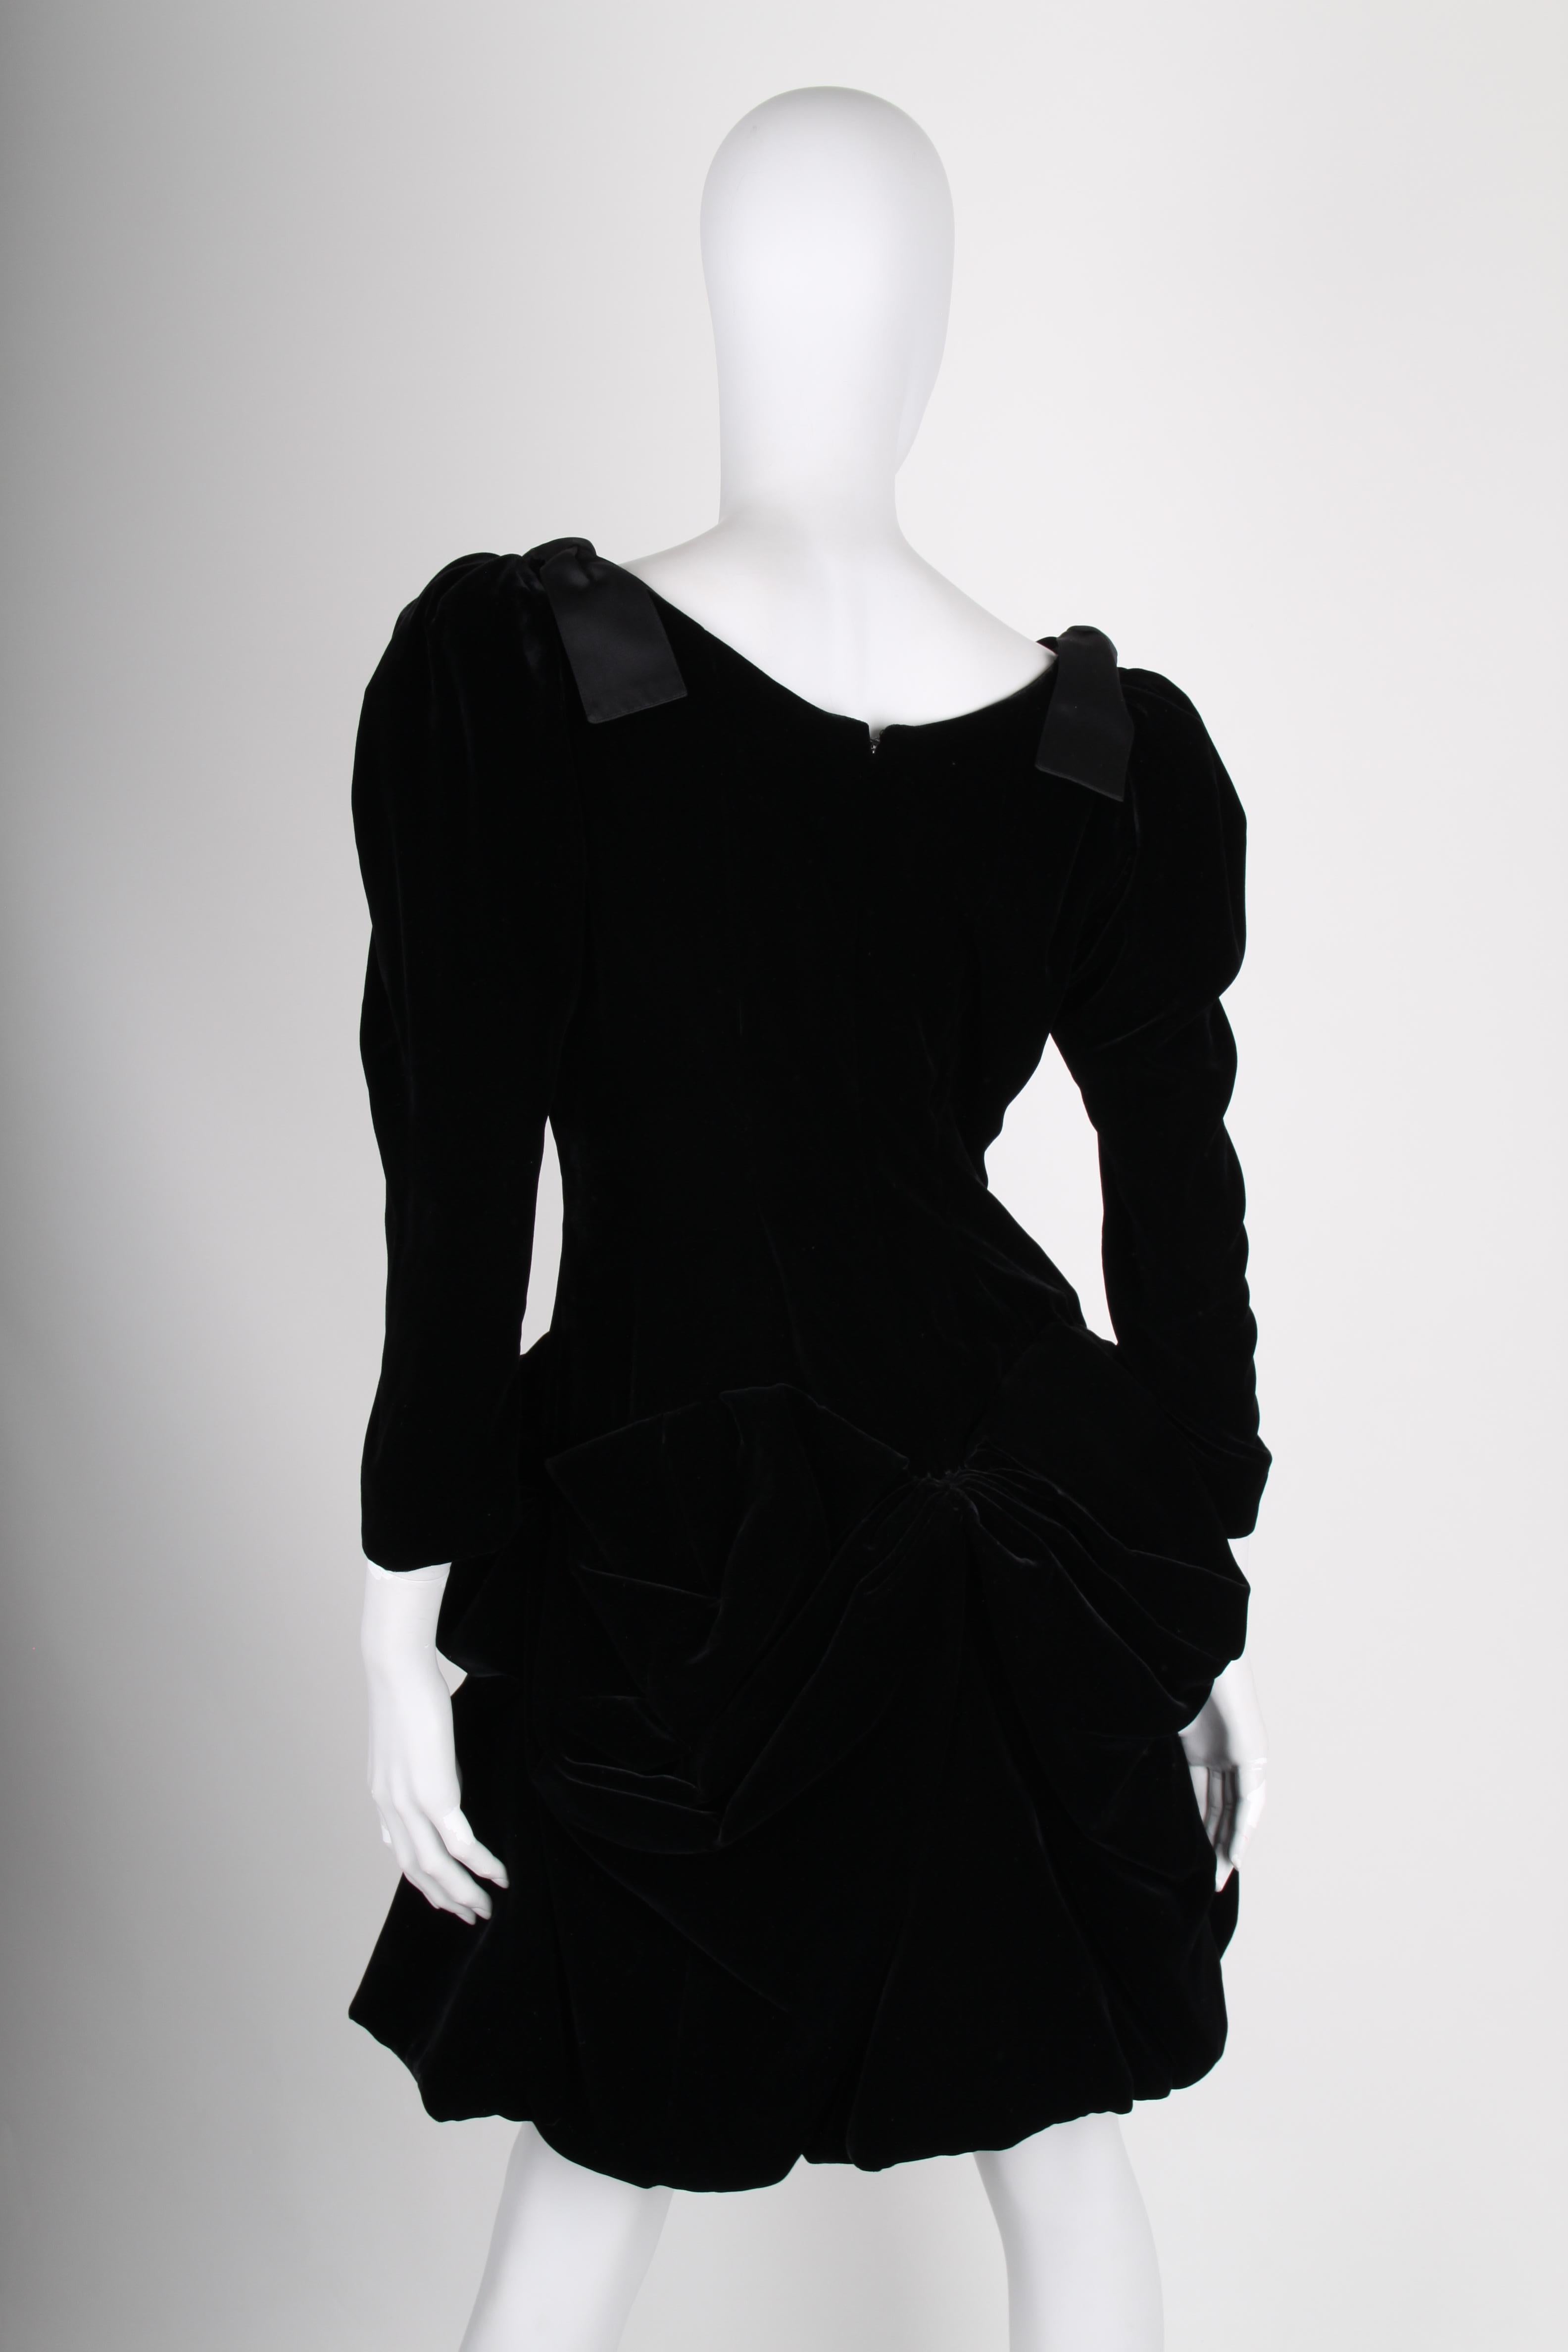 This vintage dress by Yves Saint Laurent is soooo cool!

Made of black velvet; a deep V-neck, long sleeves, bows on the shoulders and a super wide skirt. Fully lined, the skirt has a red/pink petticoat, Very neat!

Back closure wit a zipper, the